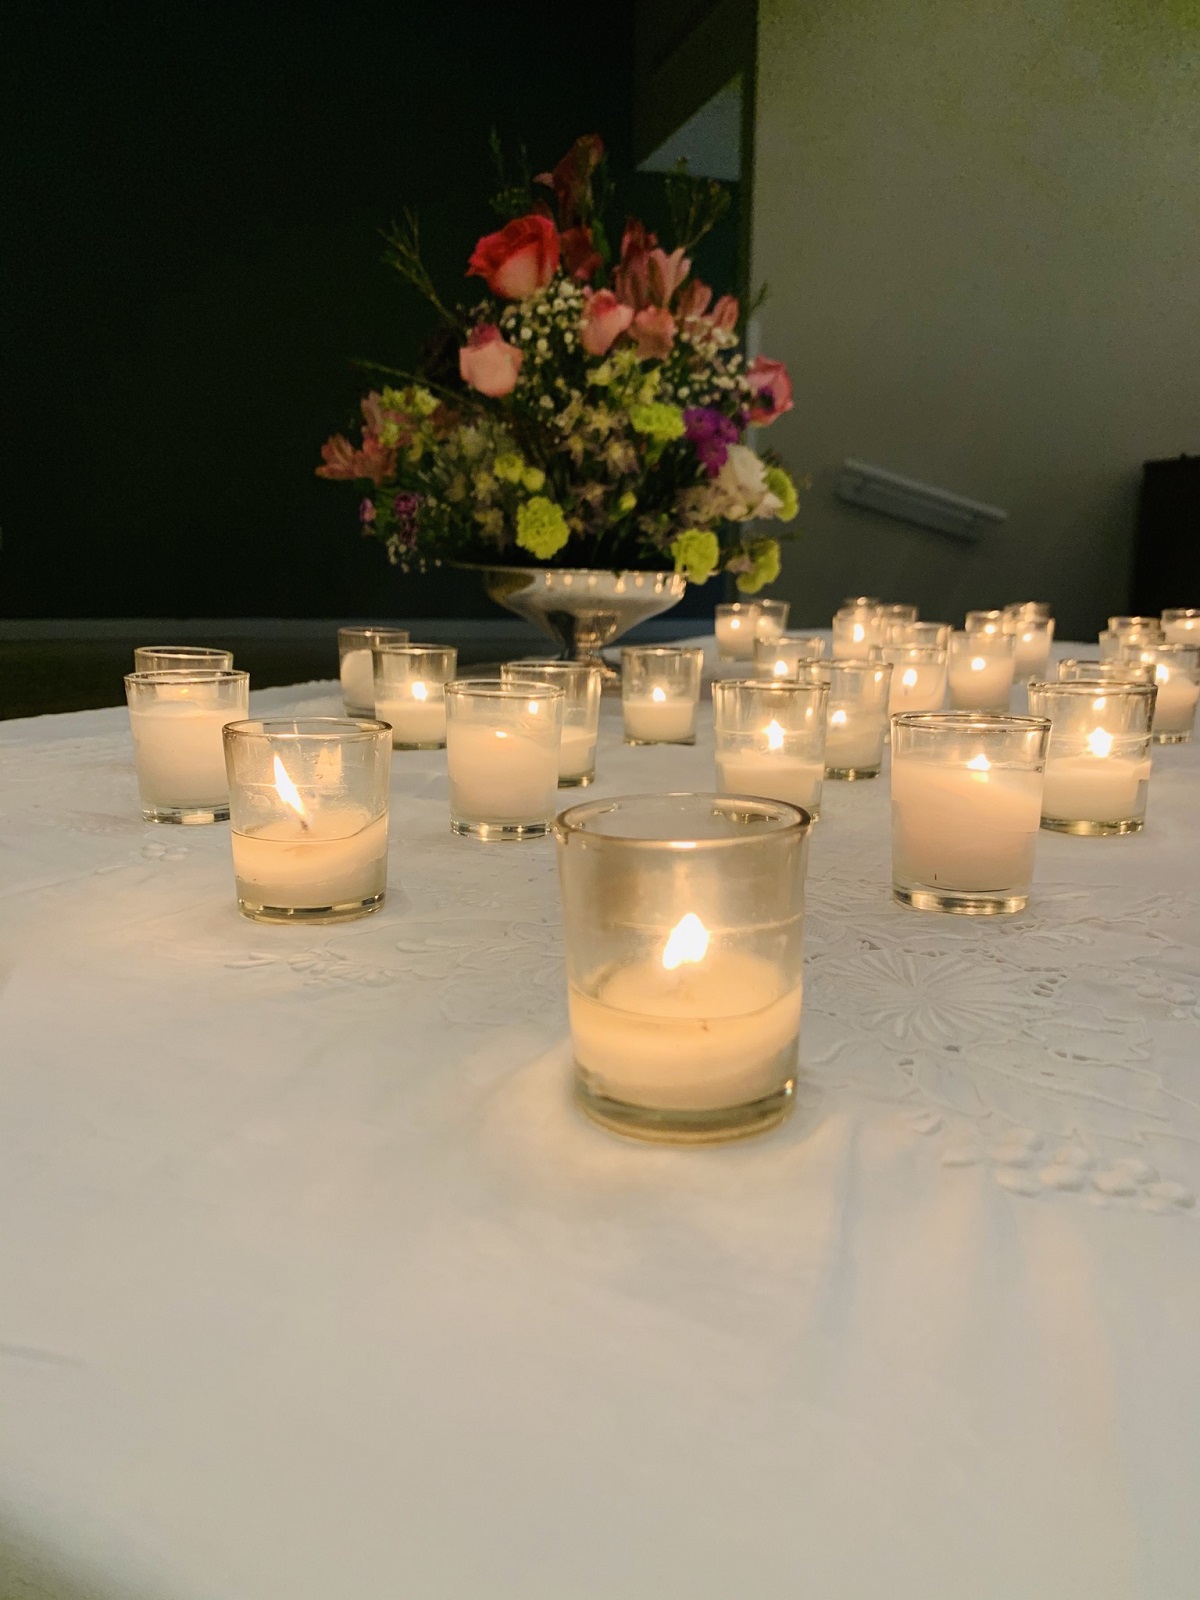 Lakewood Hosts an event of Remembrance with a table of candles on the table